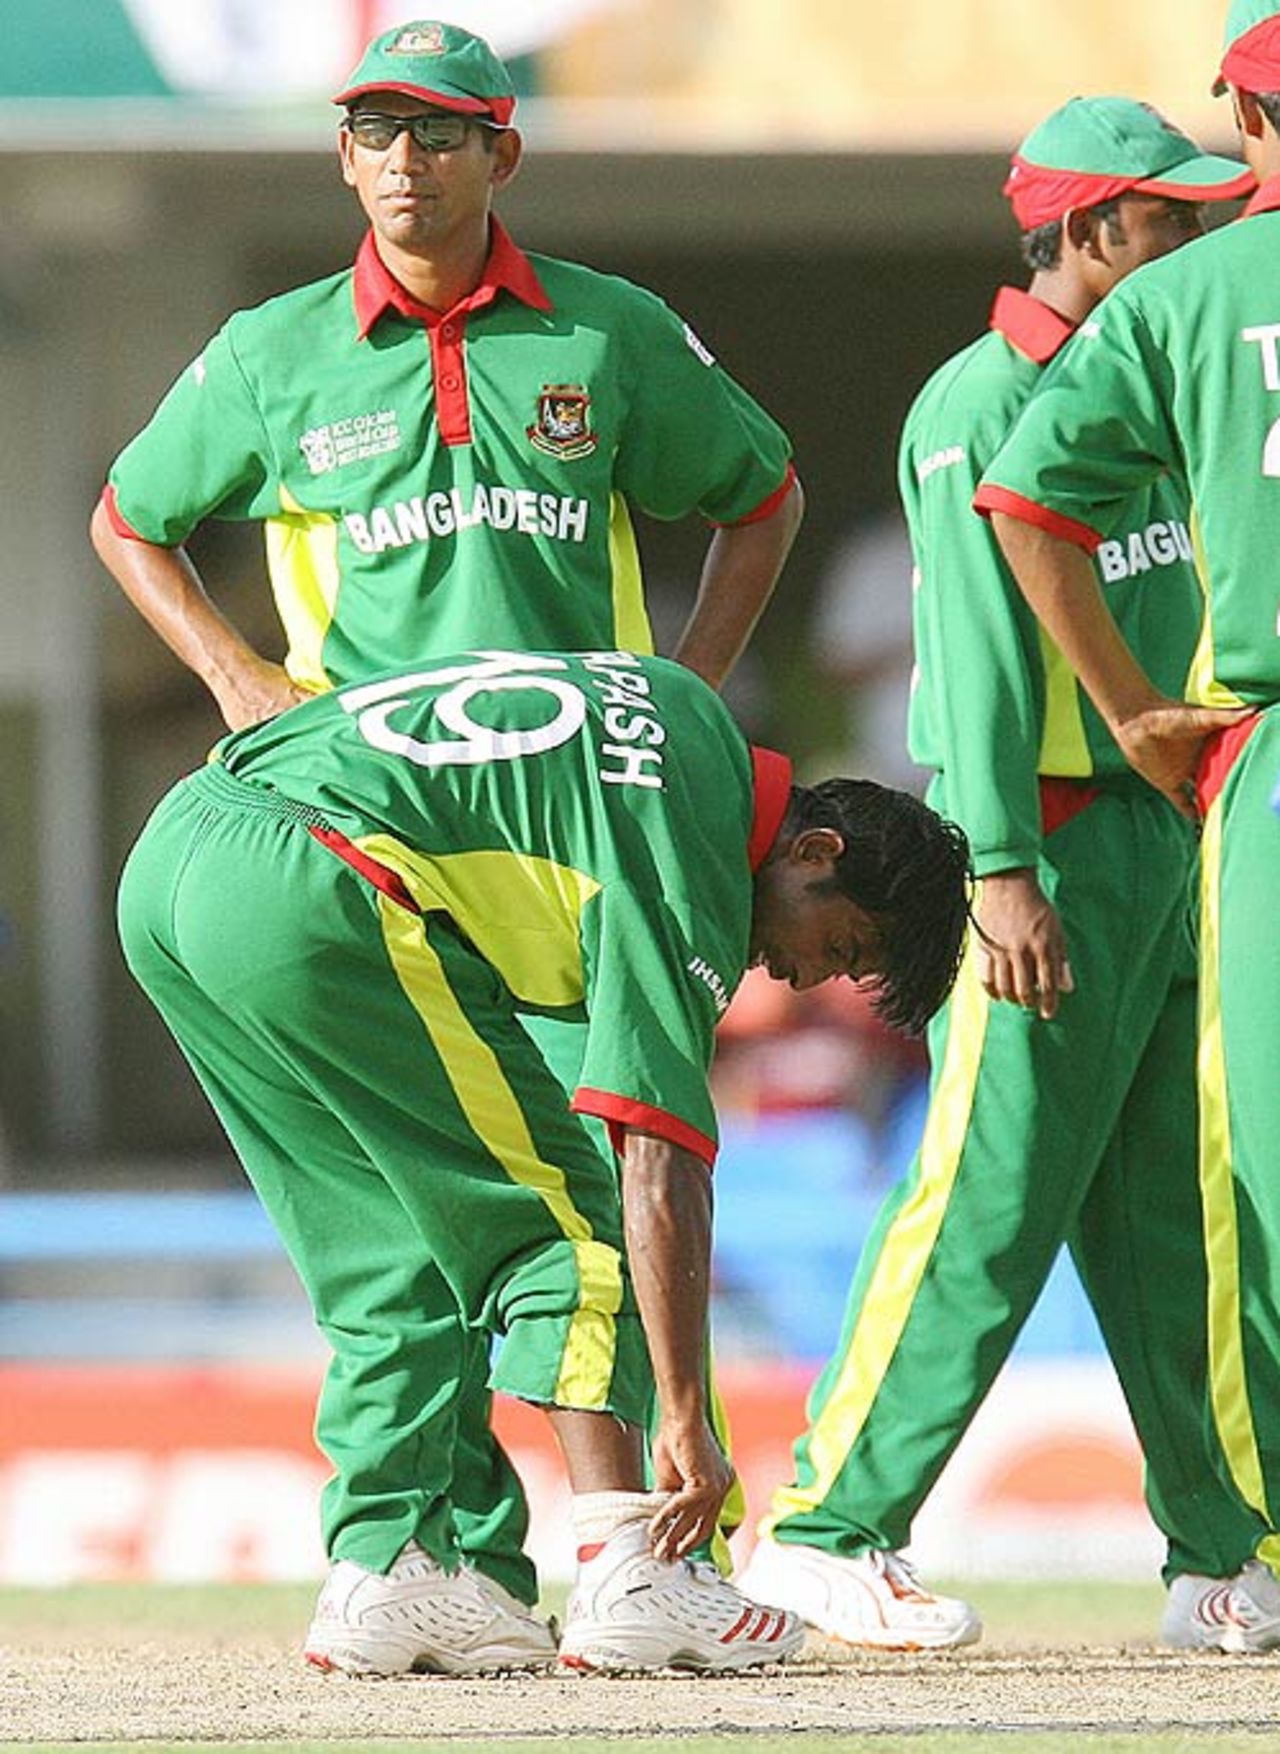 Tapash Baisya injured his foot while bowling and had to go off the field, Australia v Bangladesh, Super Eights, Antigua, March 31, 2007